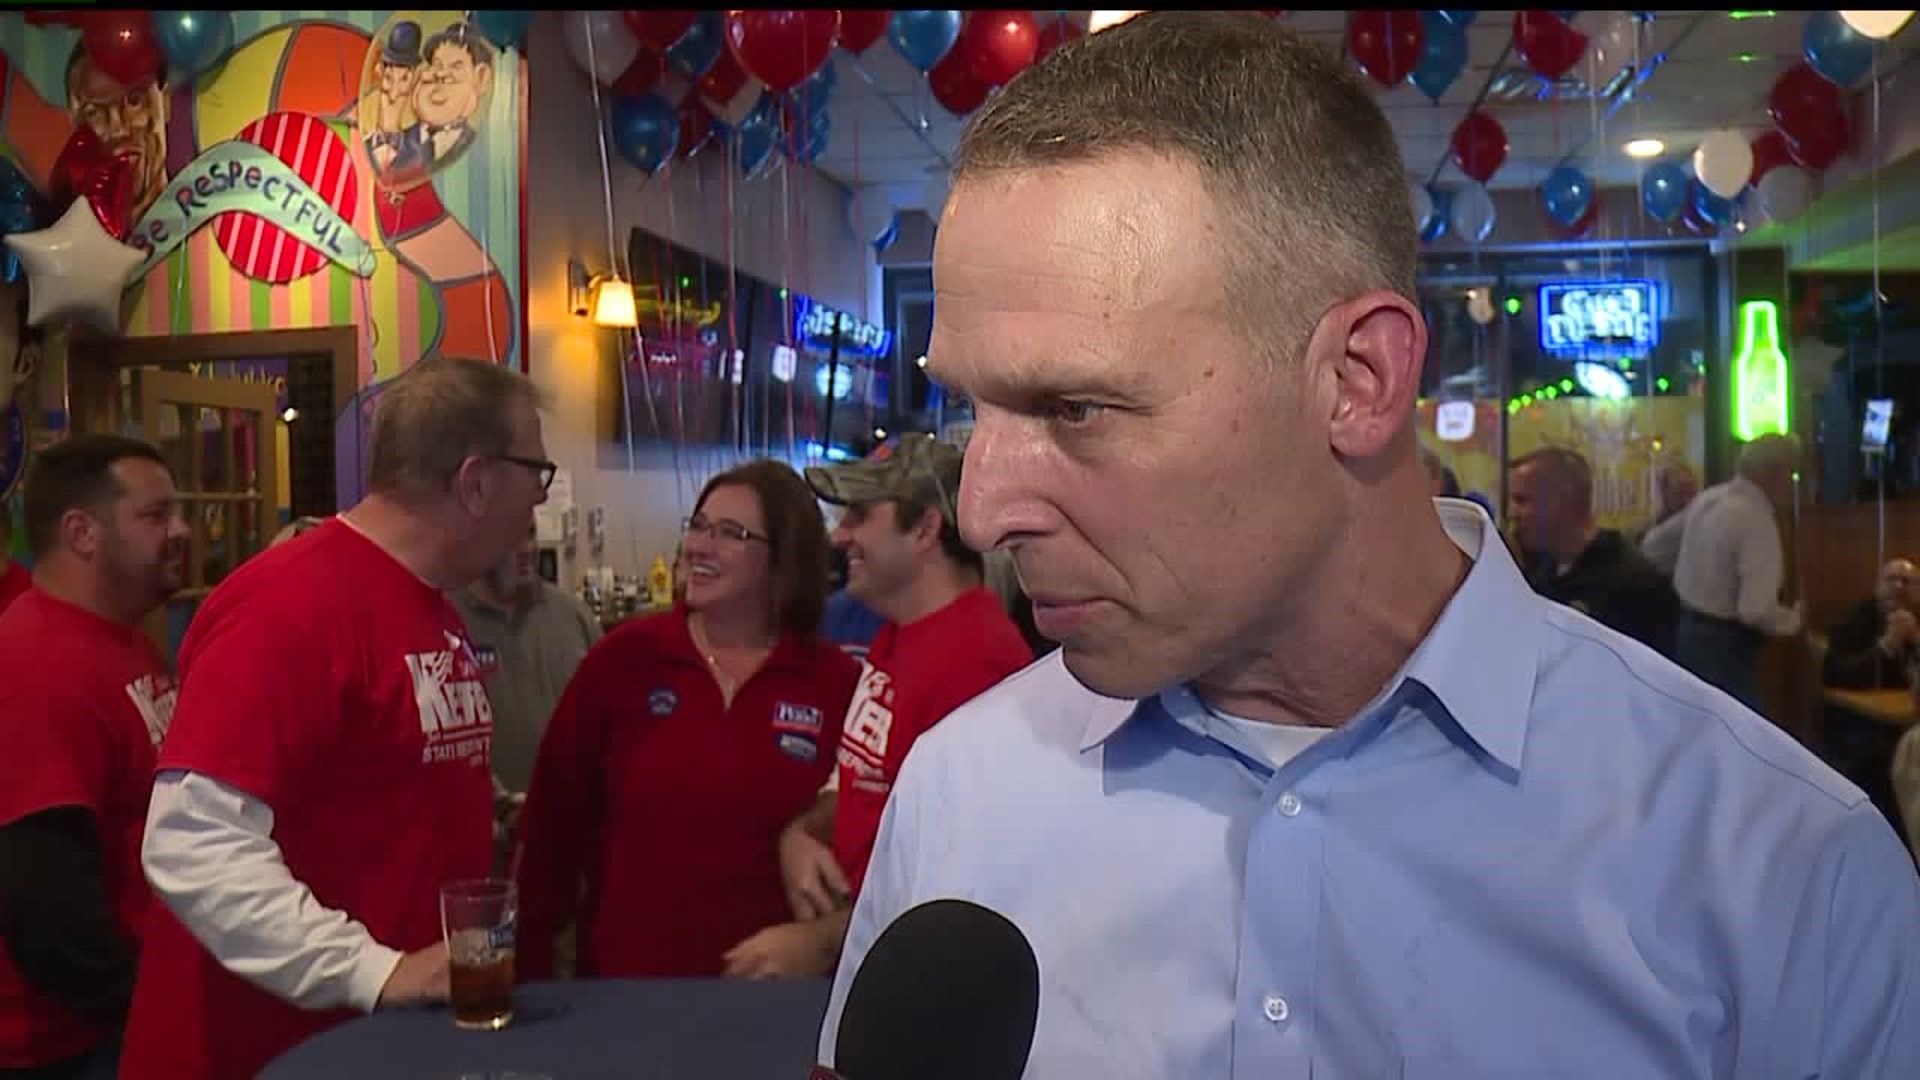 Rep. Scott Perry wins re-election in 10th Congressional District